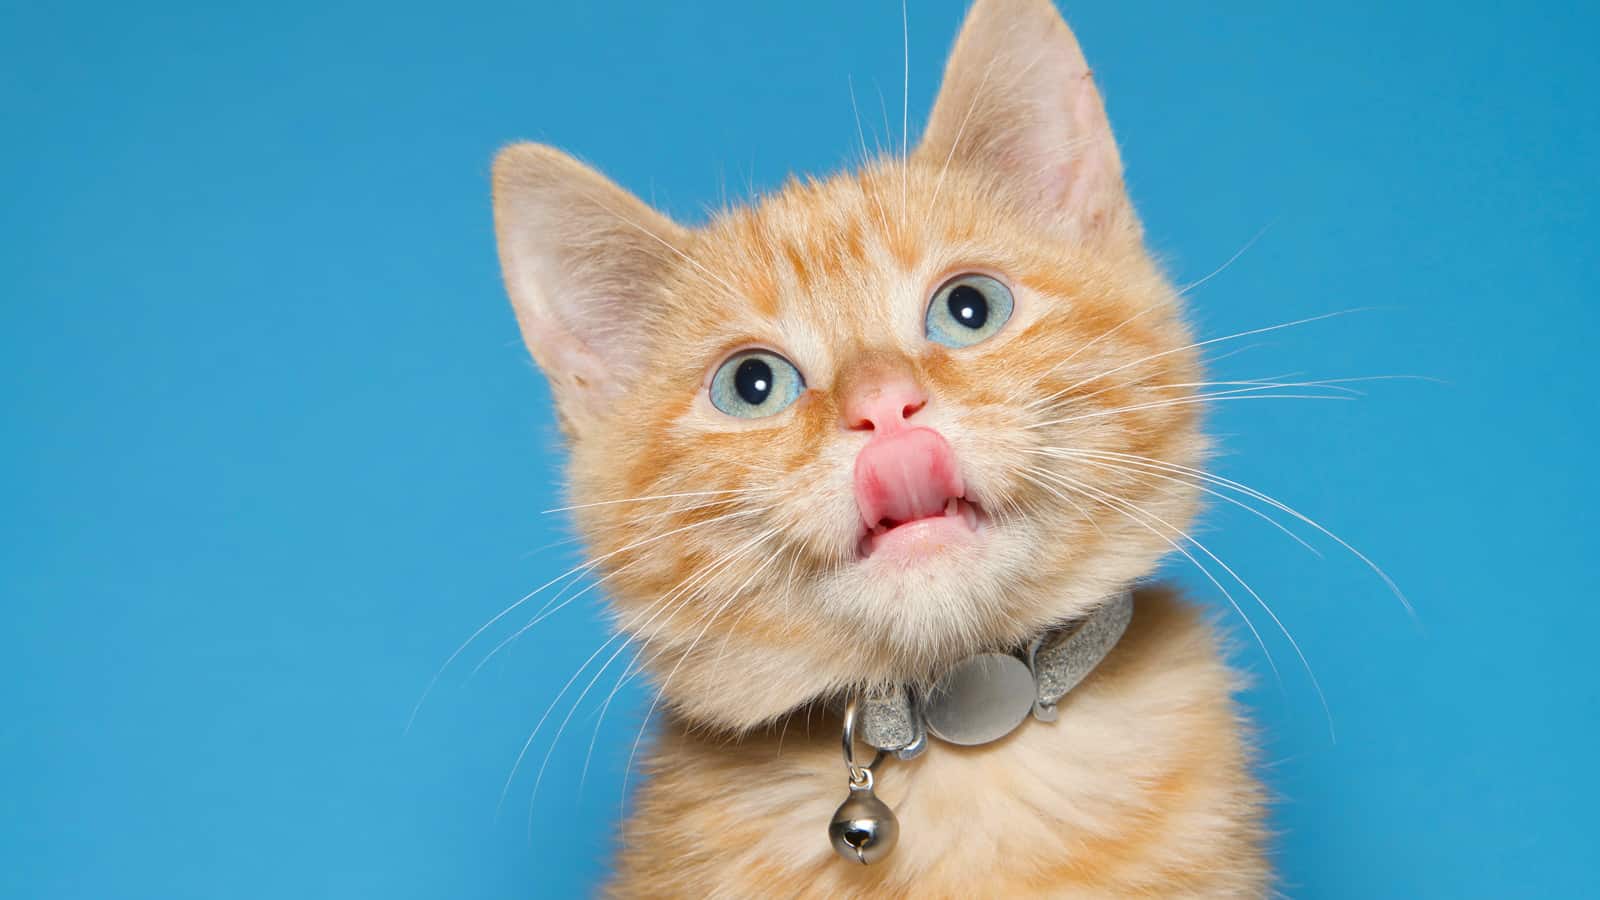 Portrait of an adorable fluffy orange ginger tabby kitten wearing a shiny collar with bell. Looking up with tongue sticking out. 